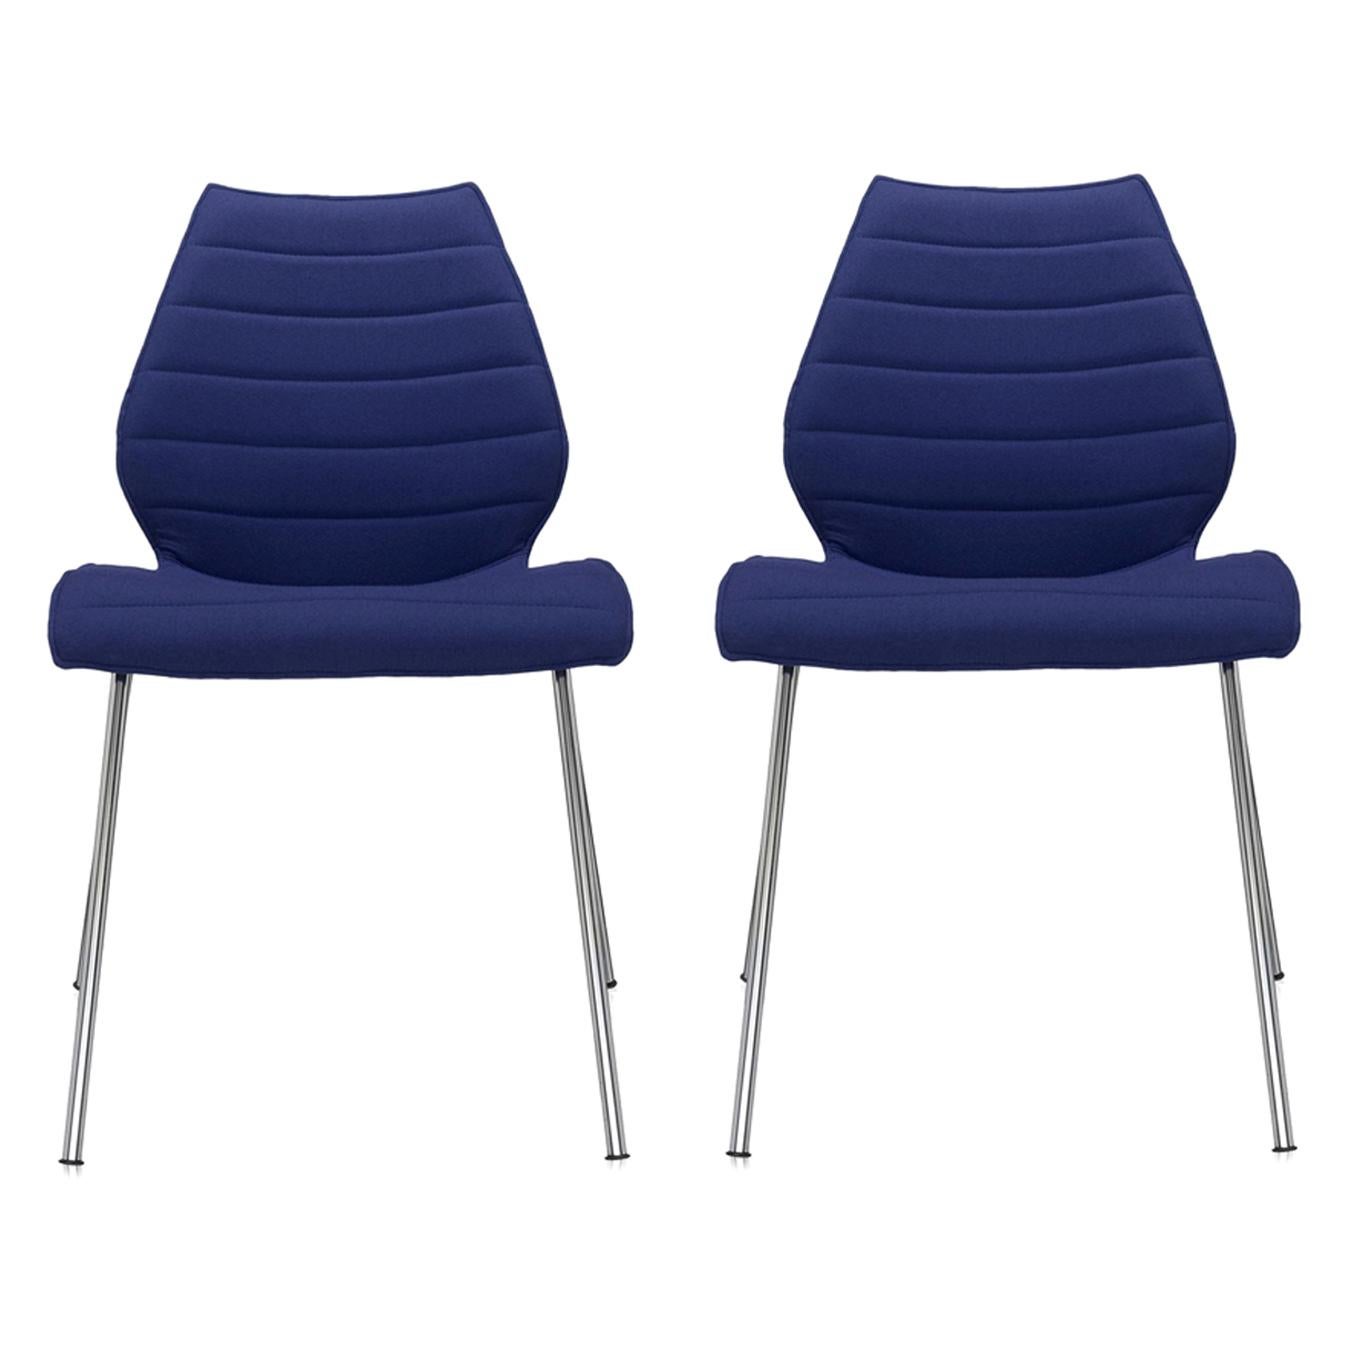 Set of 2 Kartell Maui Soft Trevira Chair in Blue by Vico Magistretti